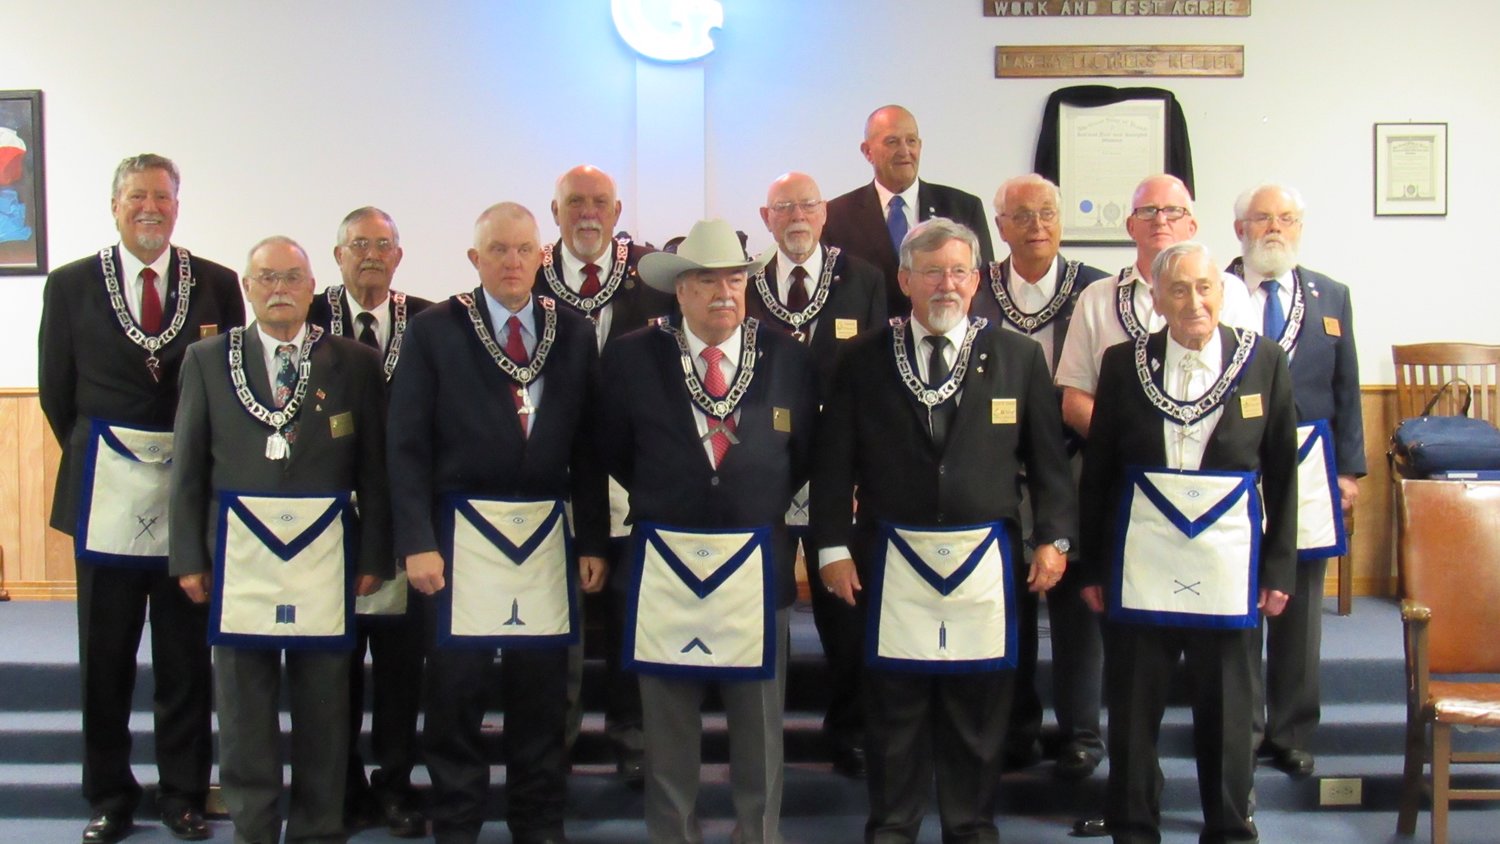 Installing officer was Verl Tramel (in back). Officers include, back from left, Larry Oliver, Elton Boubel, Charles French, Kenneth Johnson, Alfred Lobdell,  Doug Linneberger, Standlee Spencer, and, front, Earl Haddock, Diron Young, Stanley Brosky, Ralph Hooten, and John Osmonson.